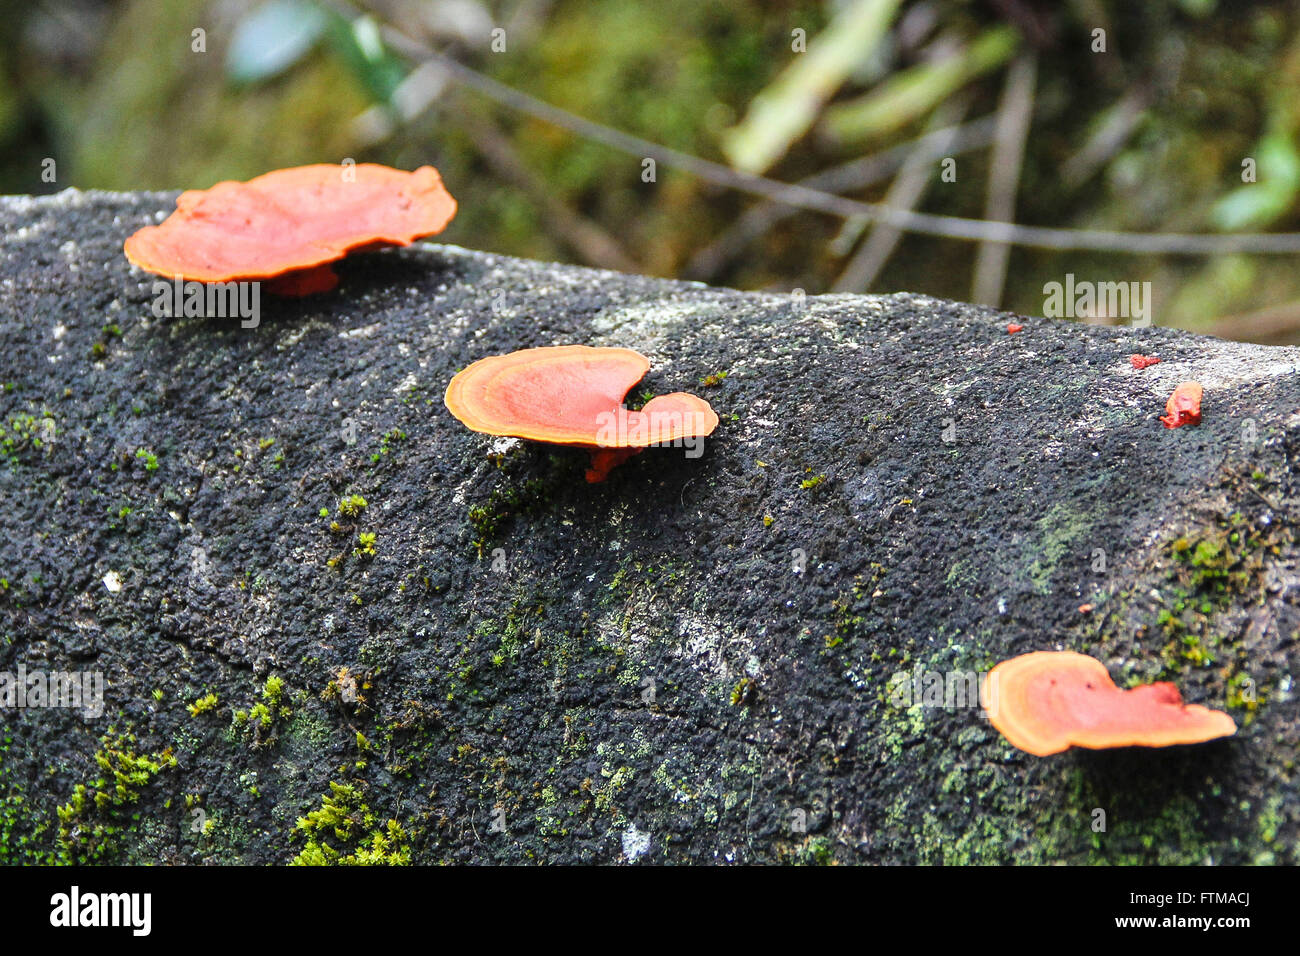 Wood ear fungus in Sierra Parrot State Park Stock Photo